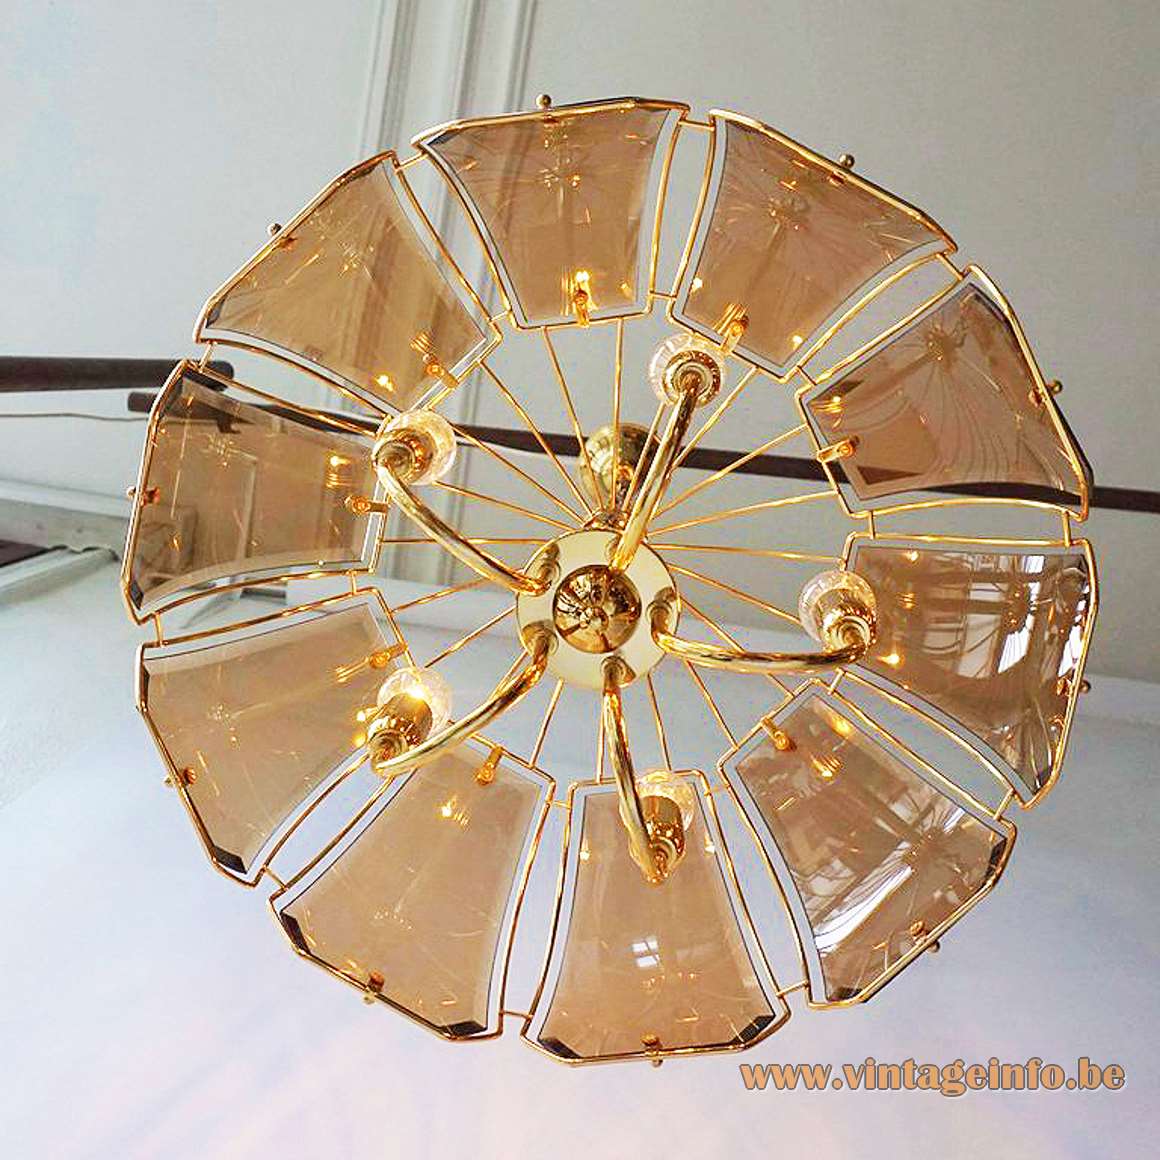 Curved smoked glass discs chandelier brass plated frame & rods Massive Belgium 1970s 1980s Sische 5 sockets